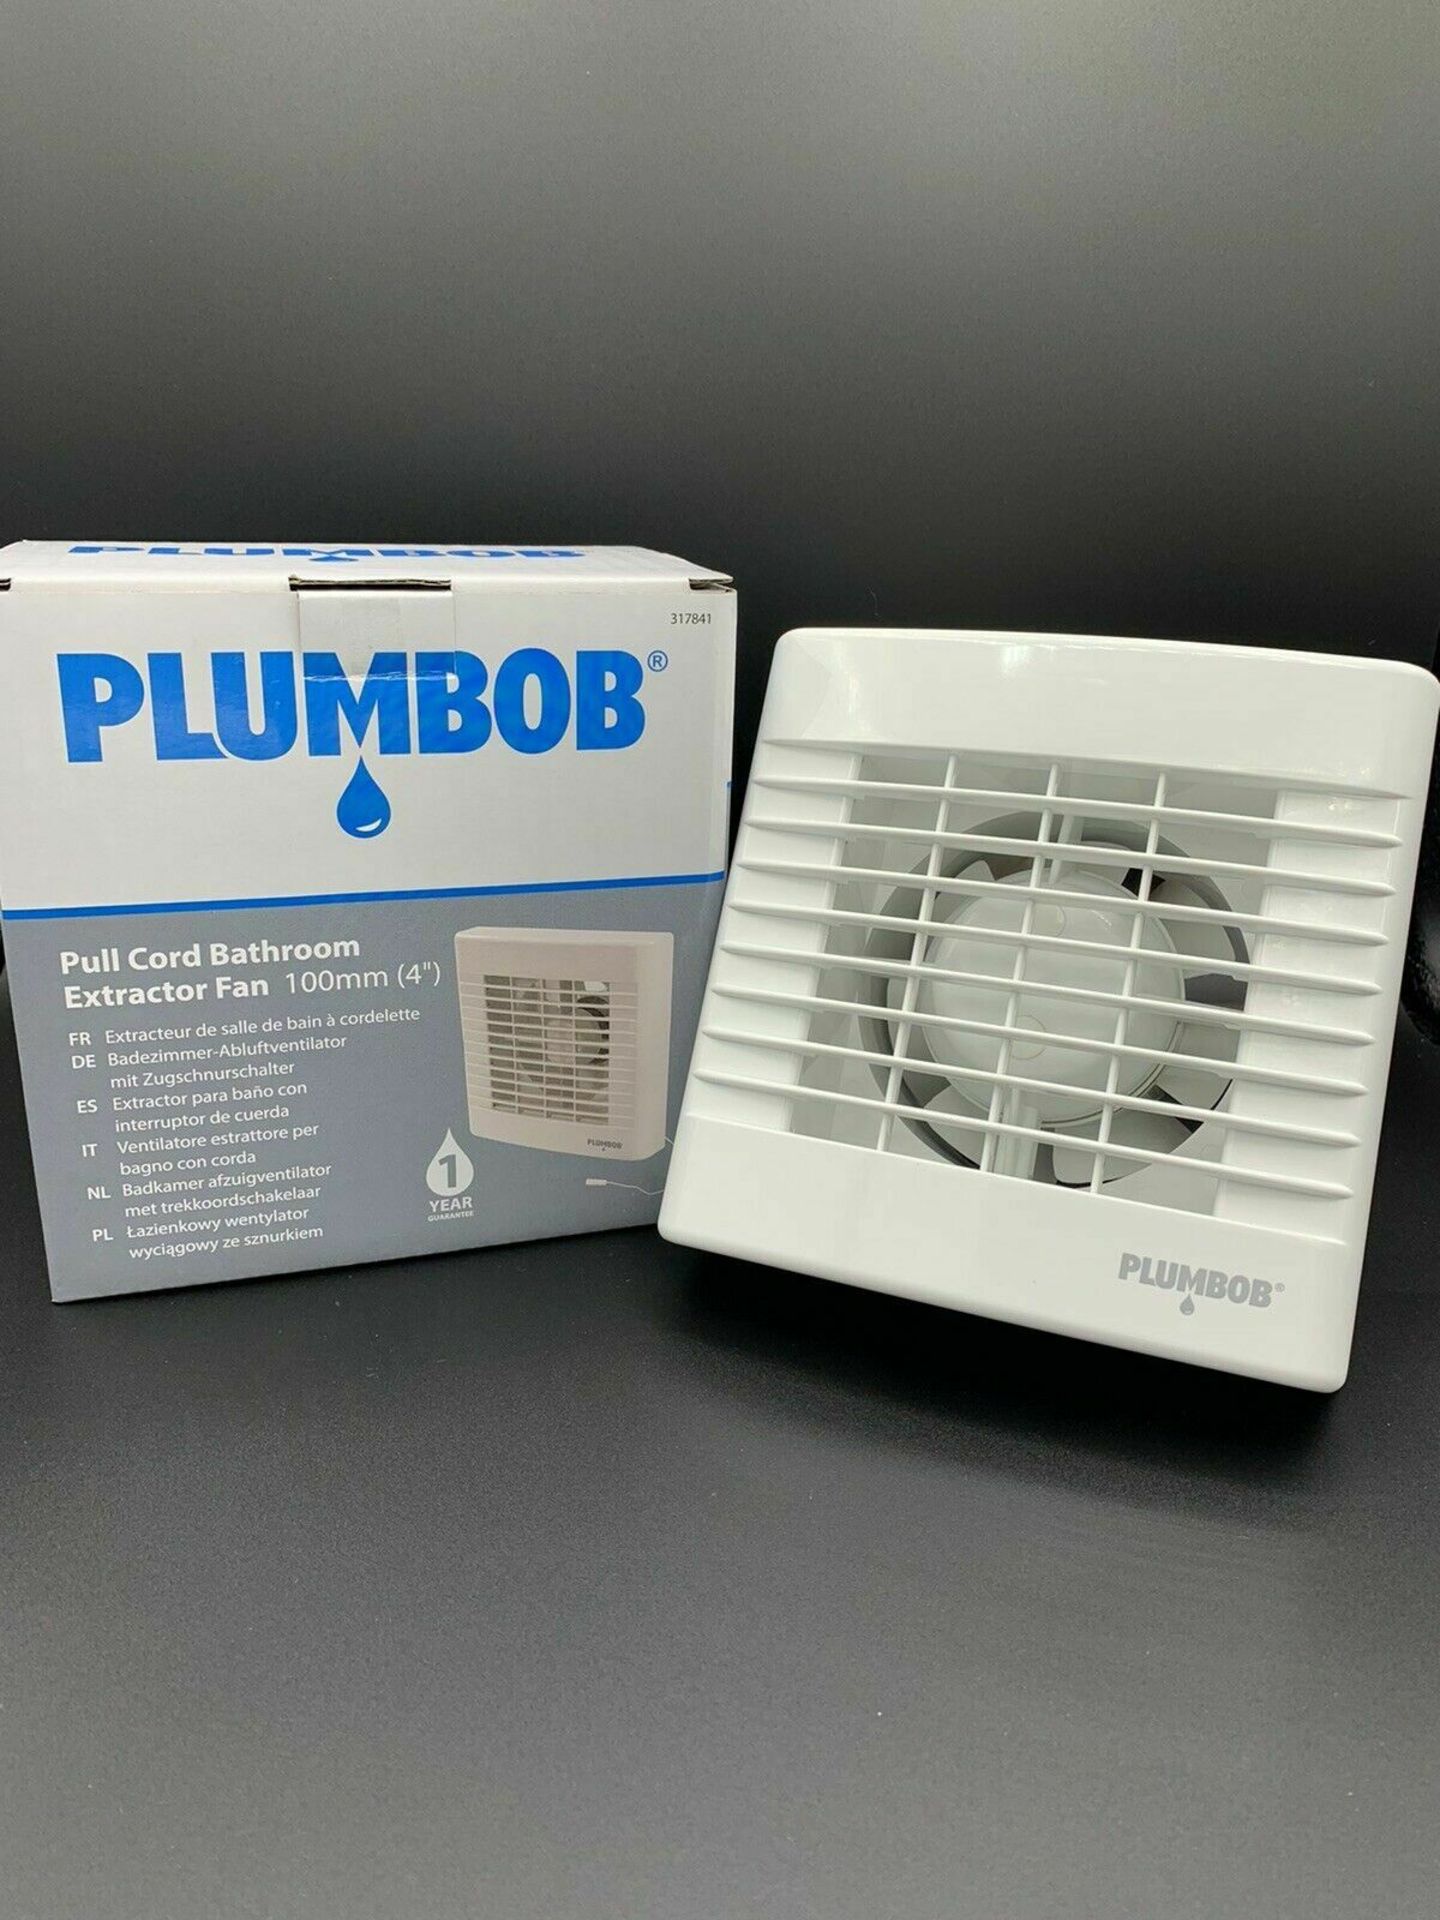 Brand New Plumbob Pull Cord Bathroom Extractor Fans 100 mm (4"") - Image 2 of 2